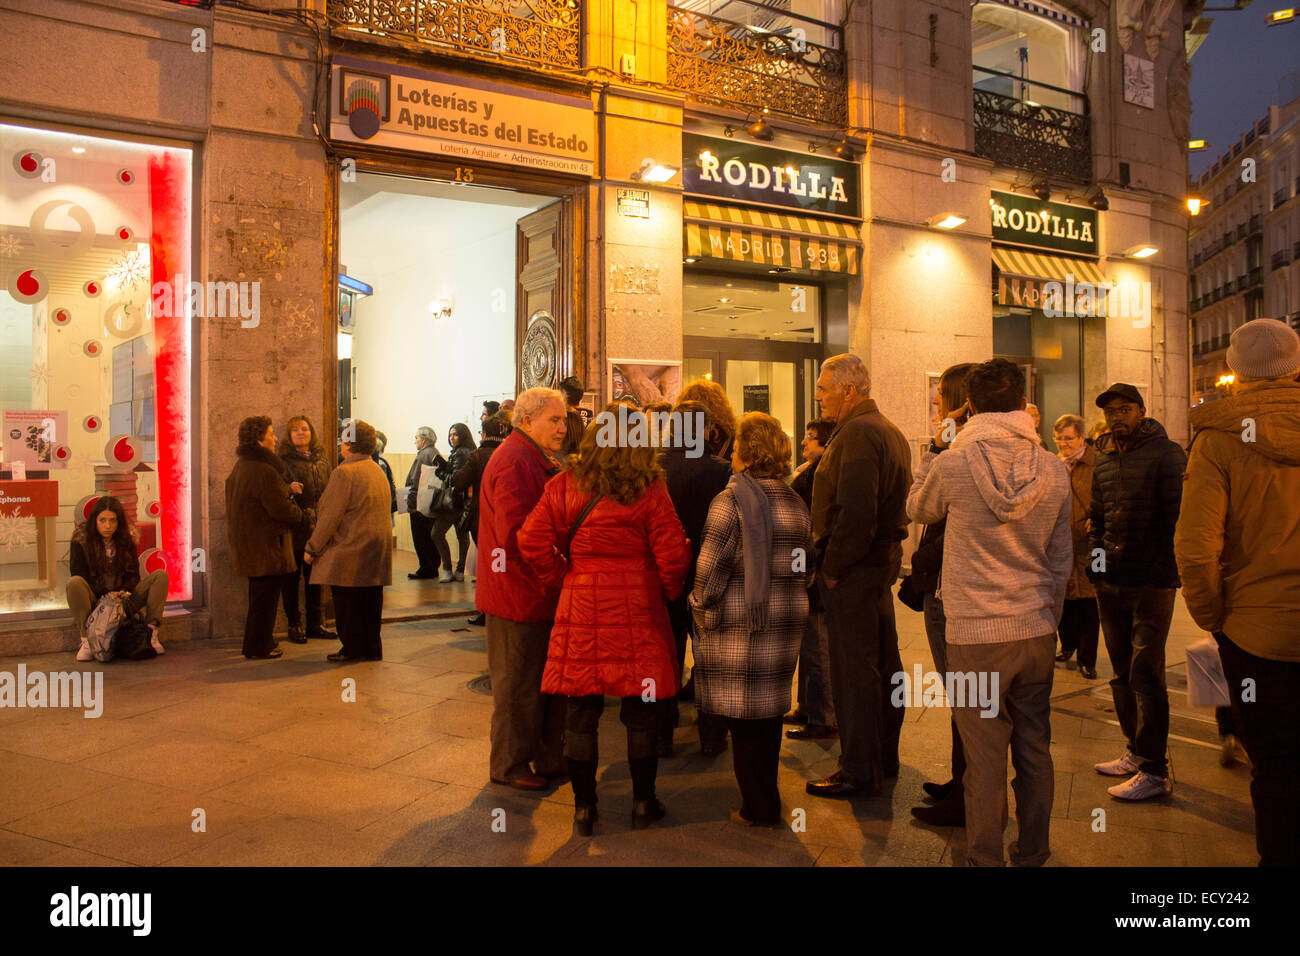 People waiting in line to buy lottery ticket, El Gordo Stock Photo